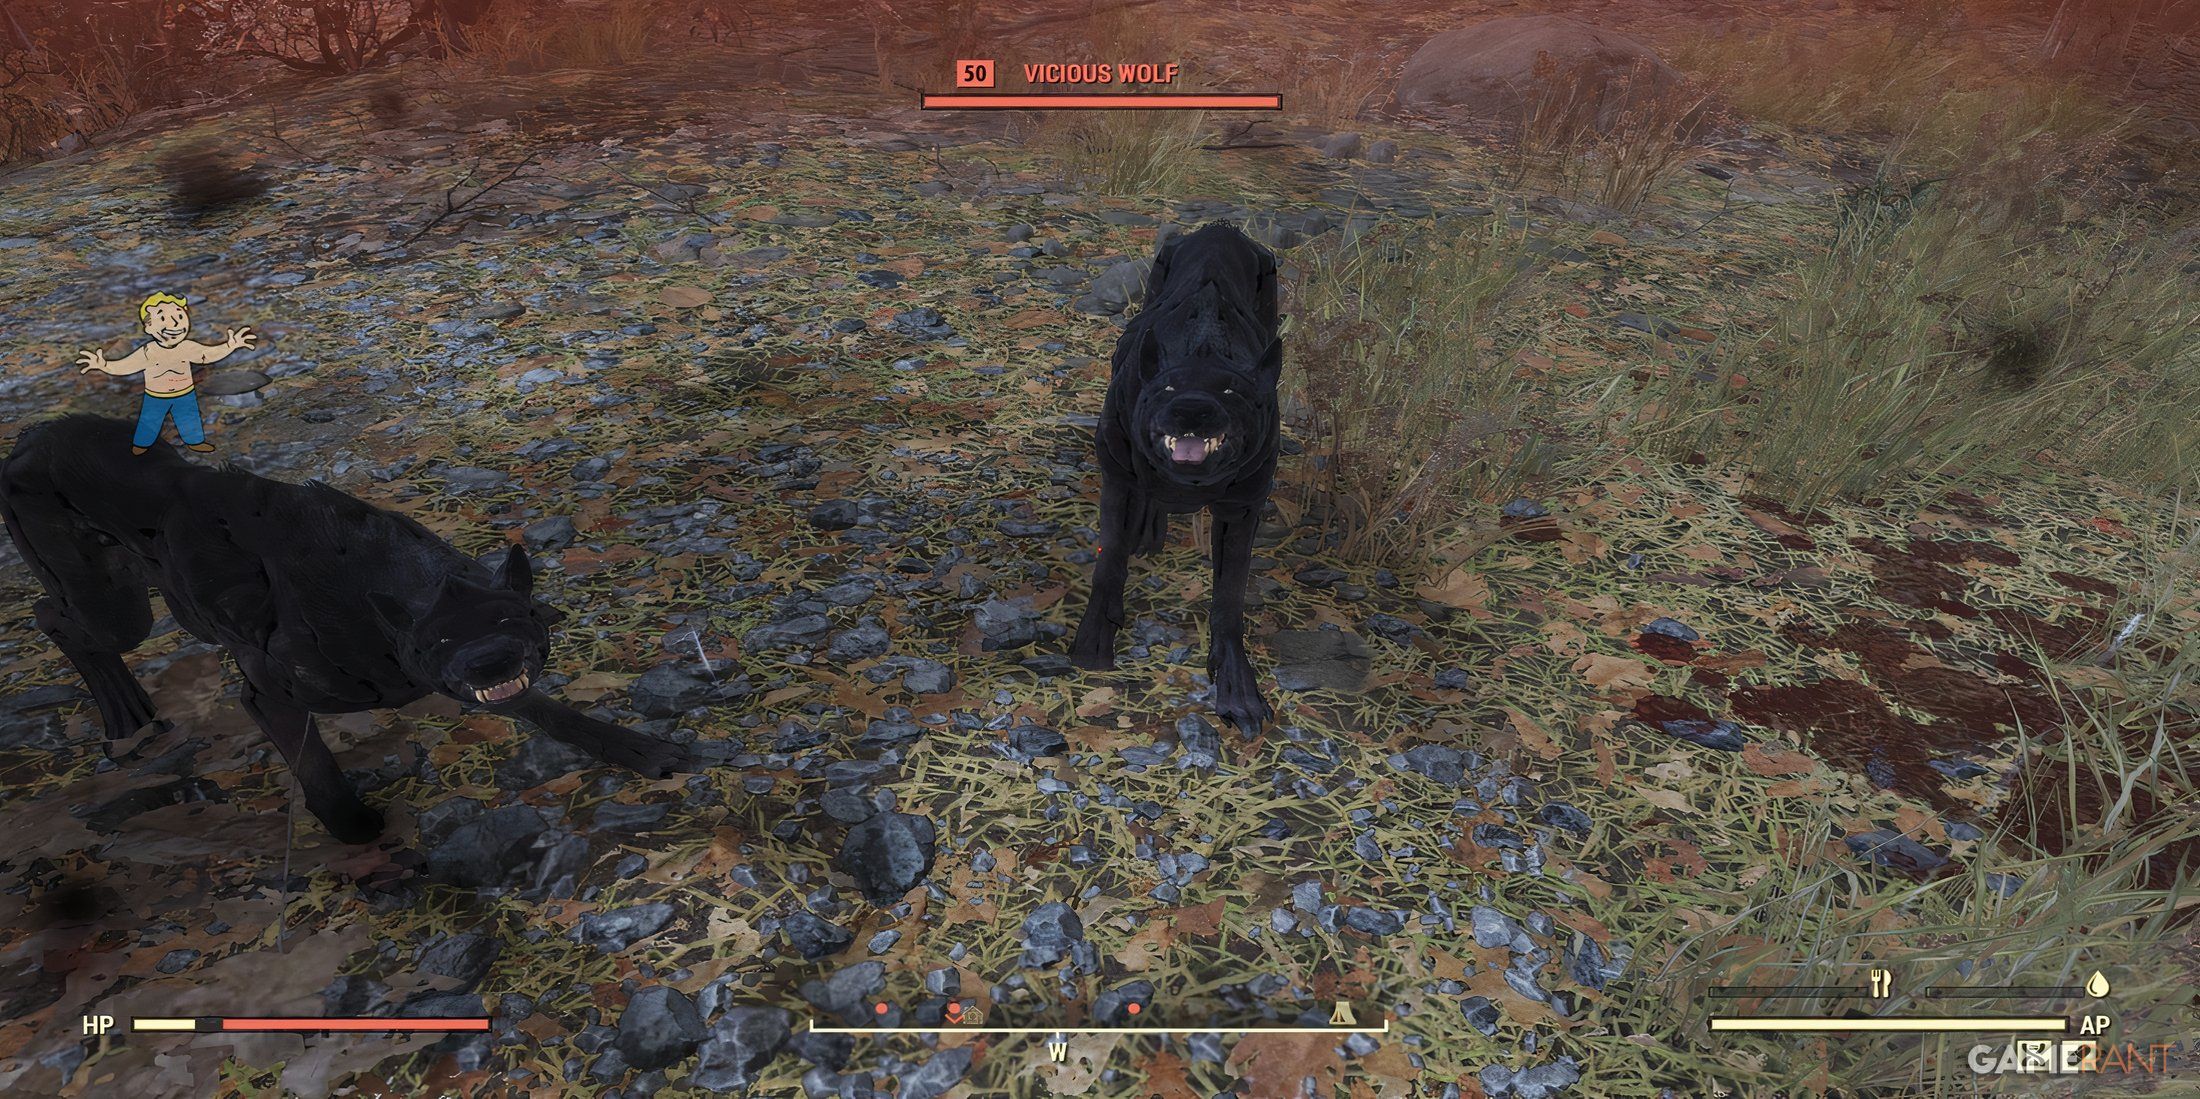 A Wolf Attack in Fallout 76